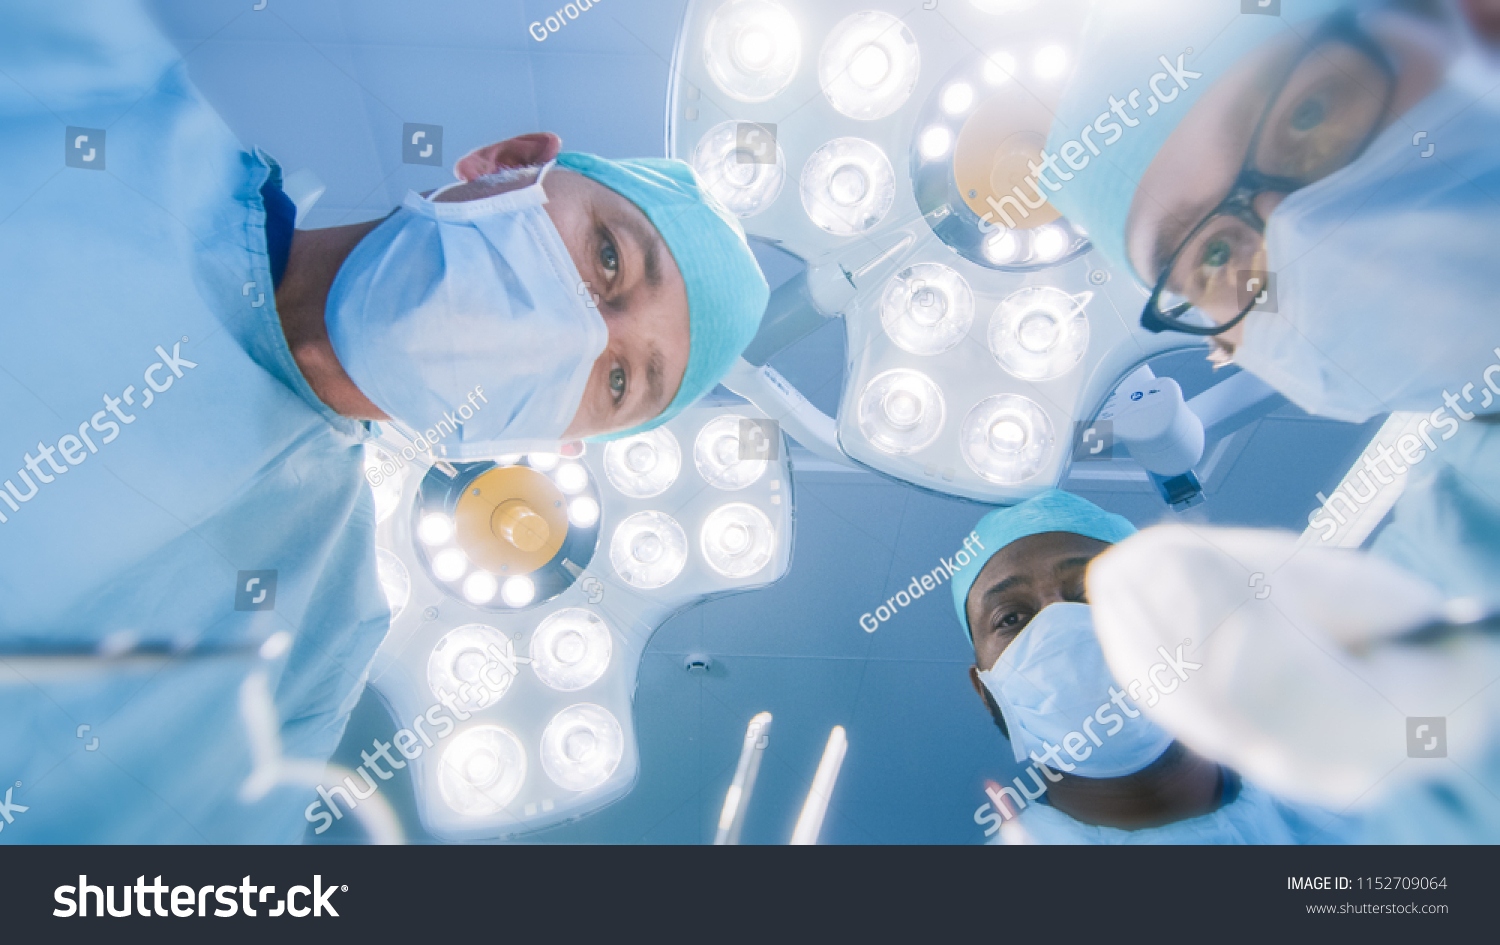 Low Angle Shot POV Patient View: Two Professional Surgeons Holding Surgical Instruments Starting Surgery. #1152709064